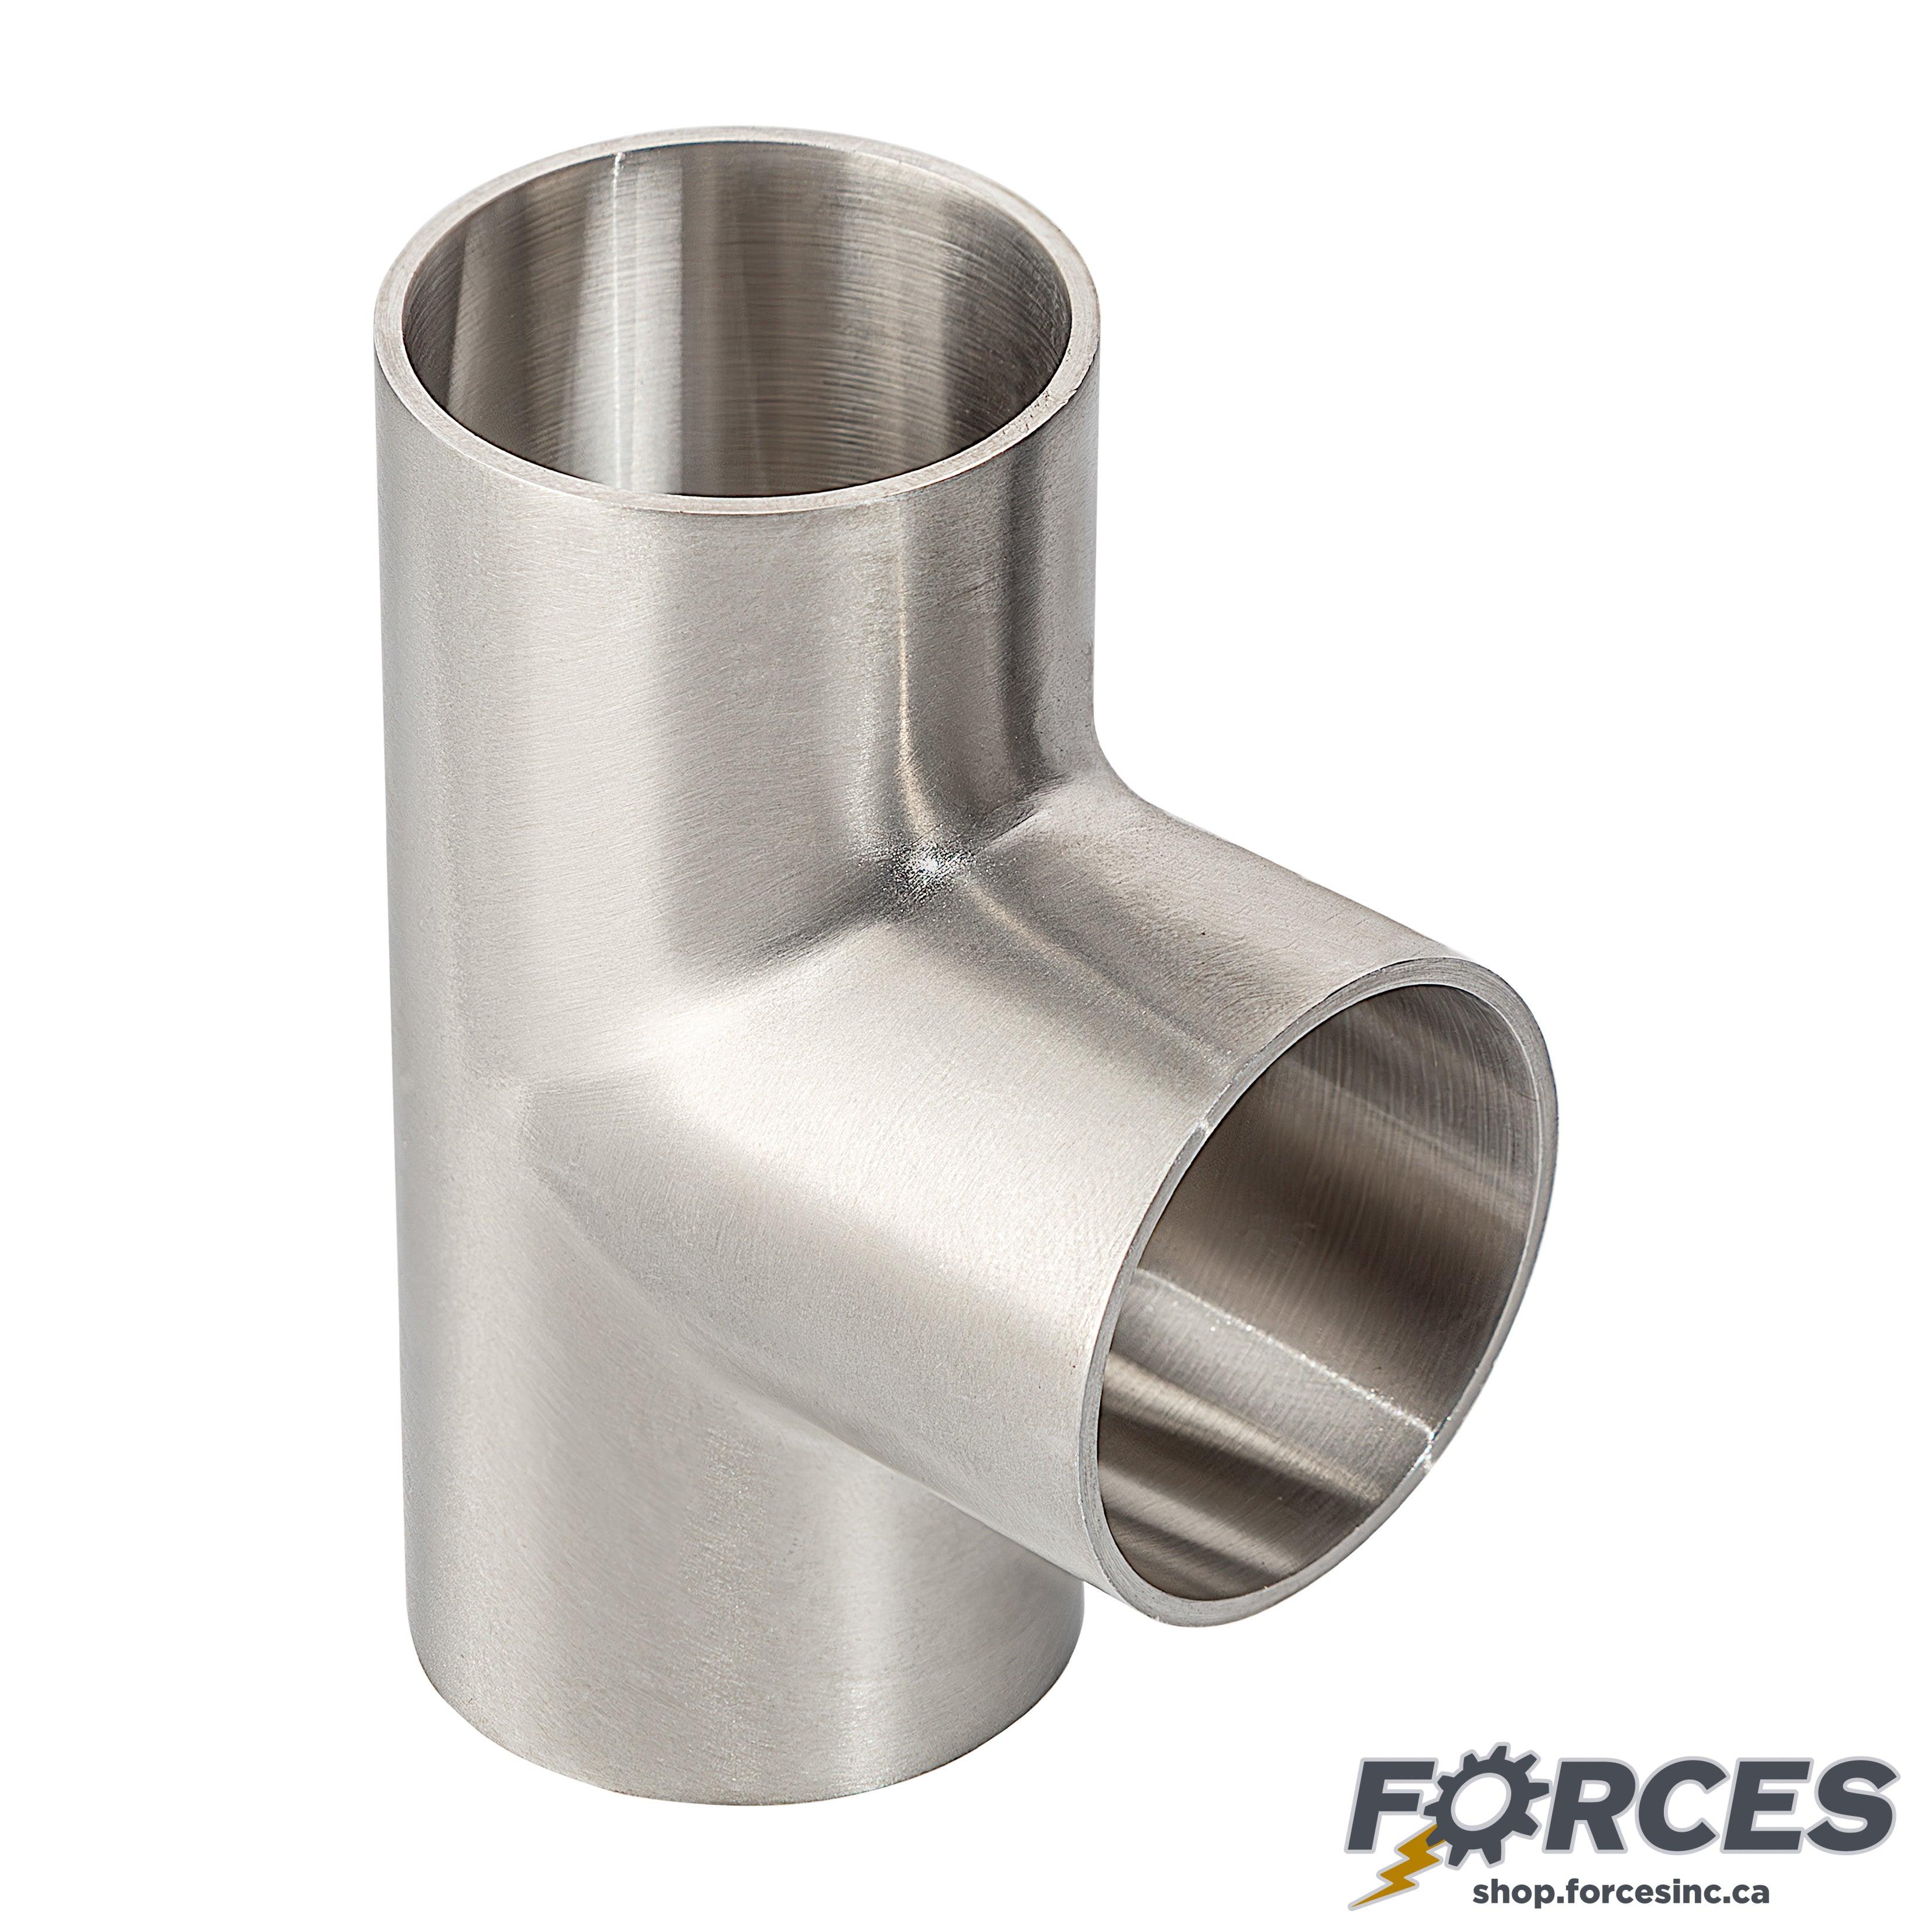 2-1/2" Butt Weld Short Tee - Stainless Steel 316 - Forces Inc